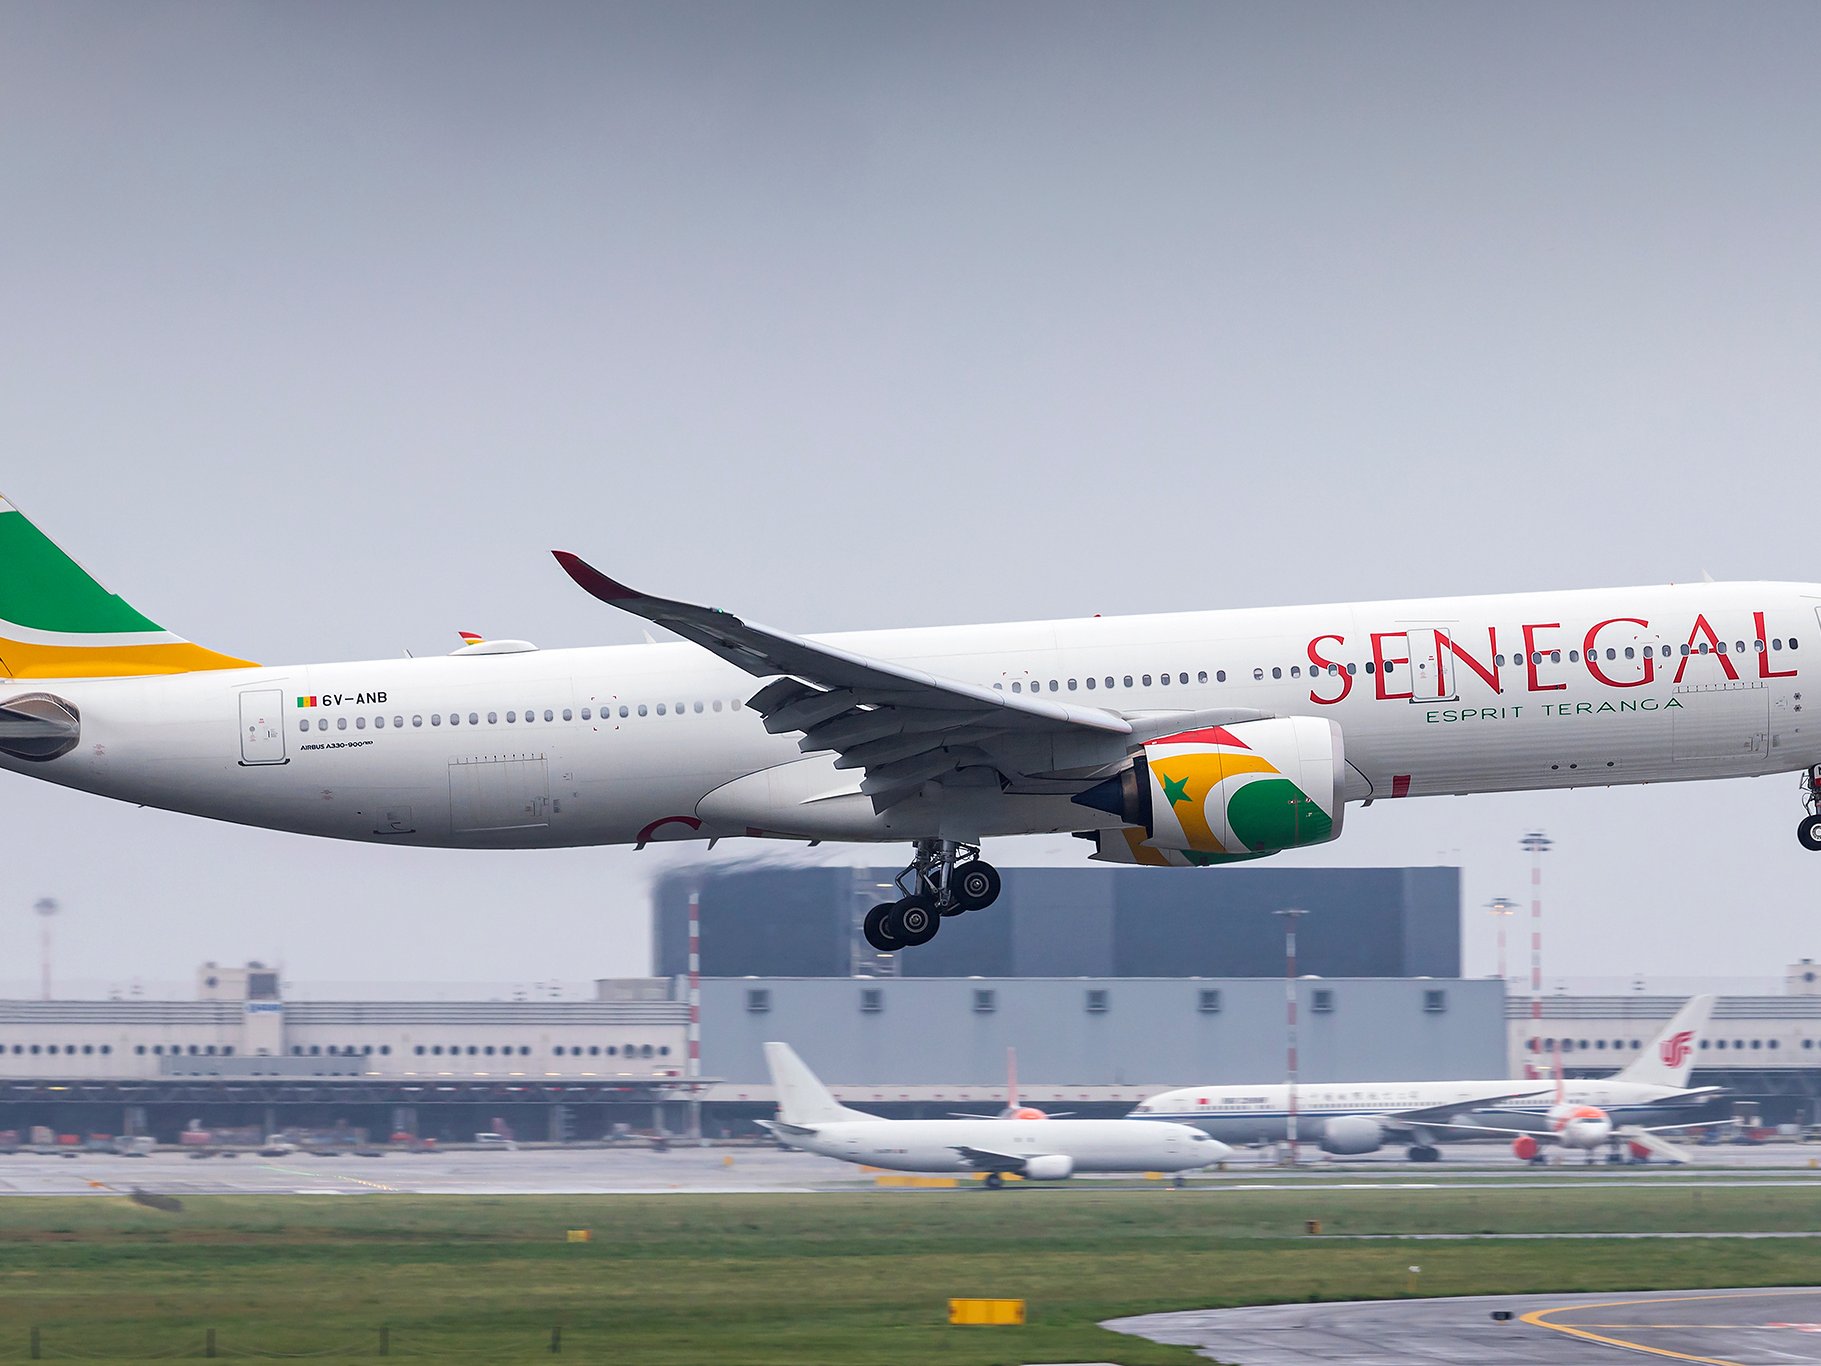 A Single African Air Transport Market could generate around 600,000 new jobs and present an opportunity for African airlines such as Air Senegal.